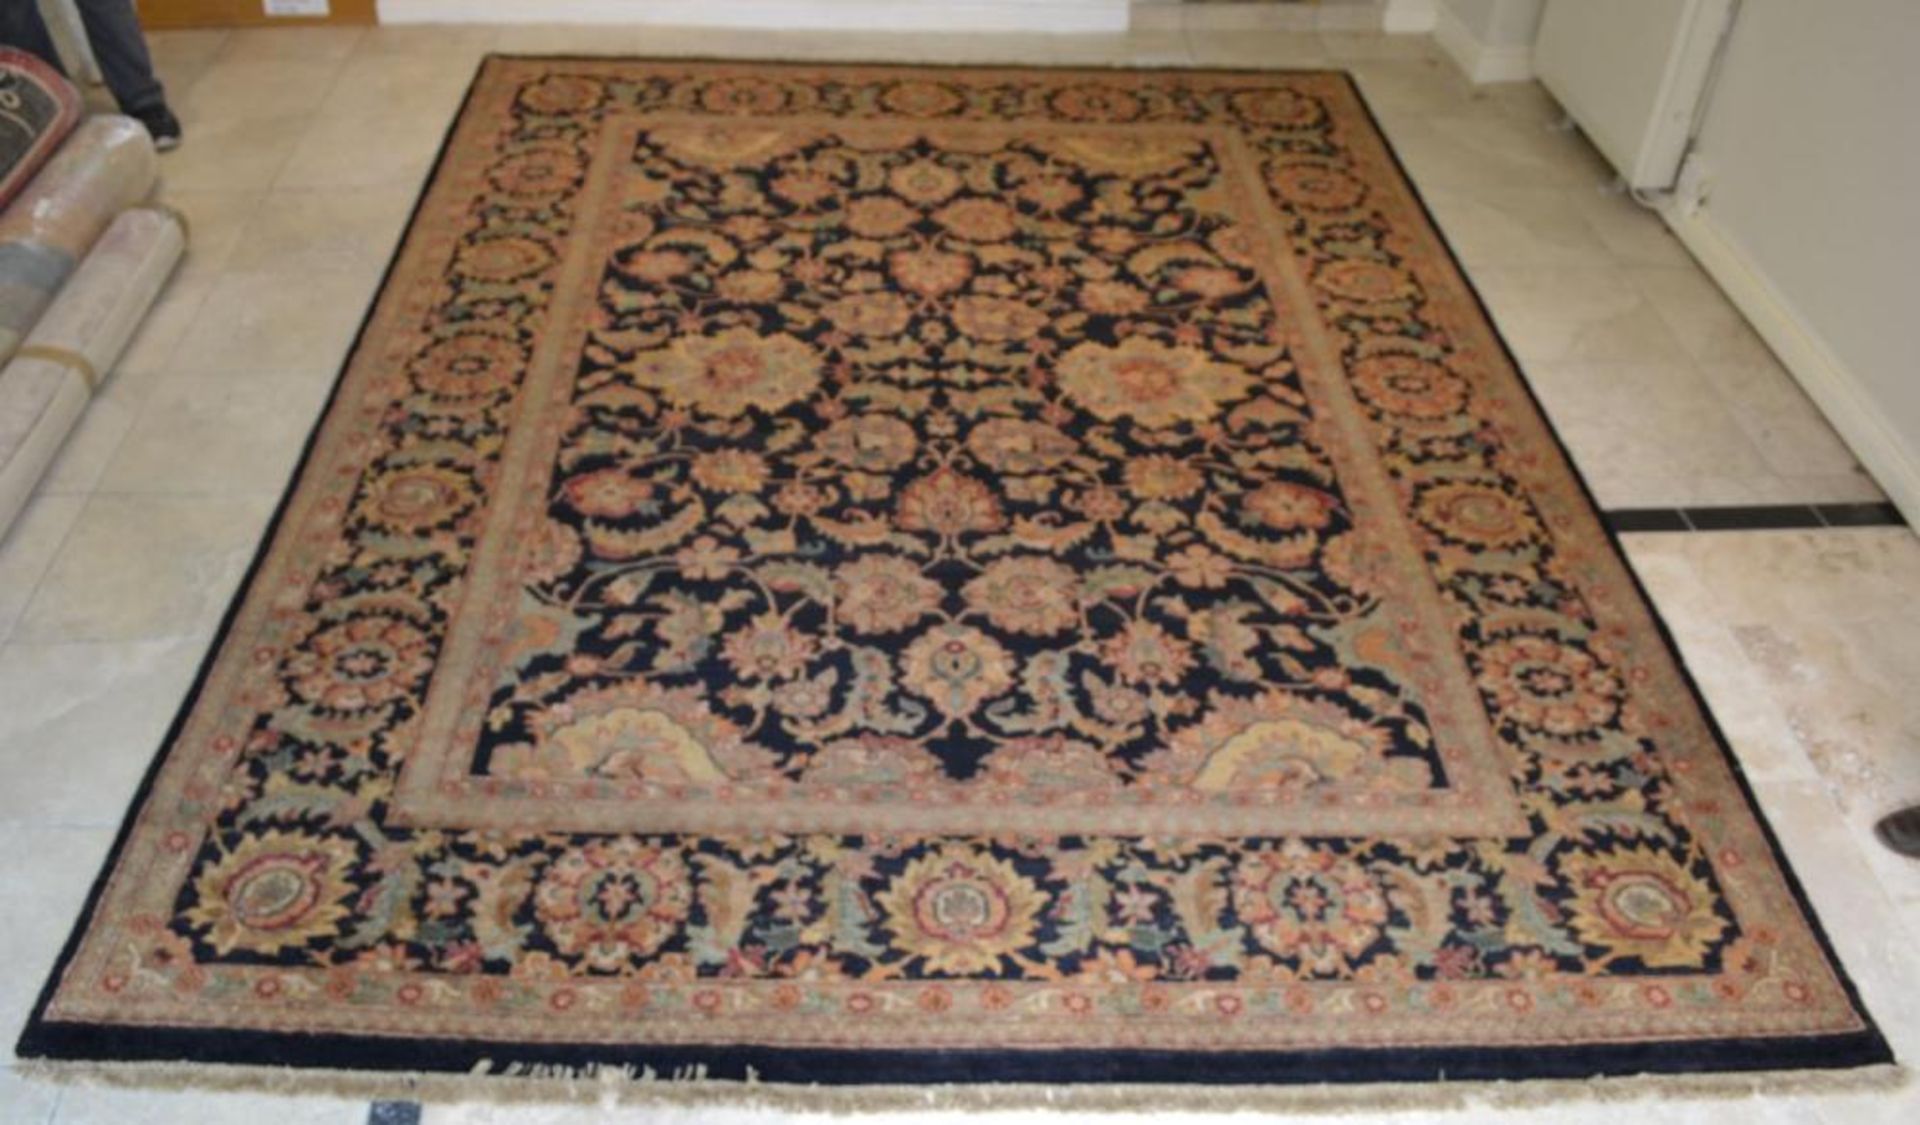 1 x Black Jaipur Handwoven Carpet - Made From Vegetable Dyed Handspun Wool - Dimensions: 367x277cm - - Image 9 of 16